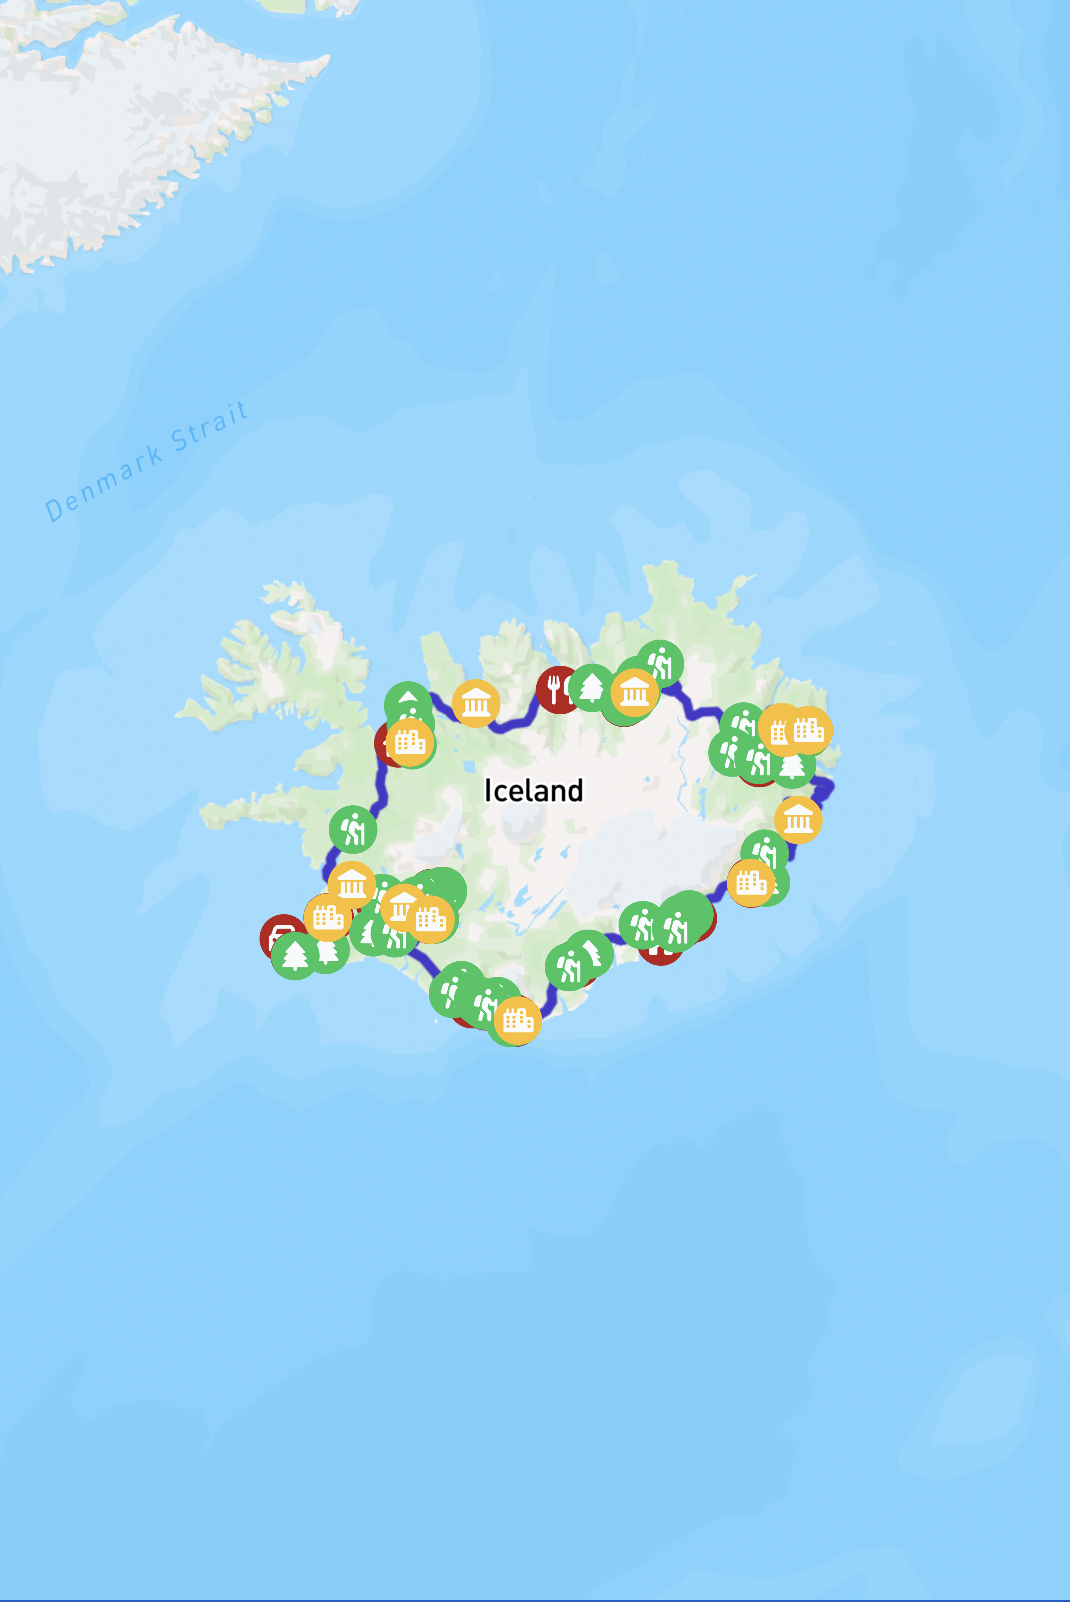 A map showing the route across Iceland.